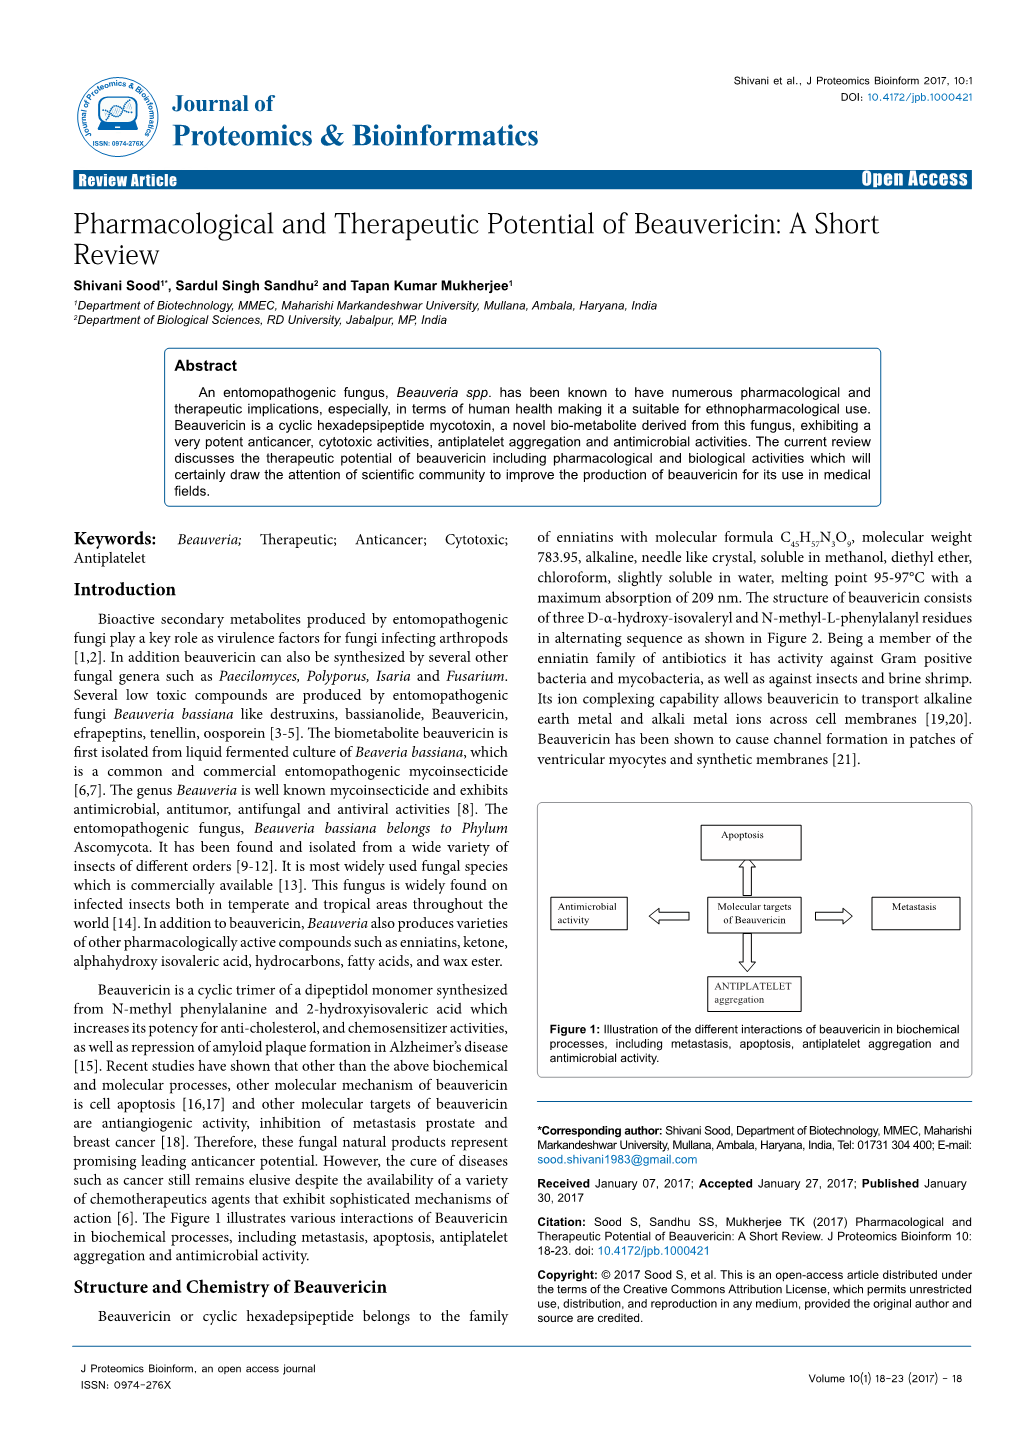 Pharmacological and Therapeutic Potential of Beauvericin: a Short